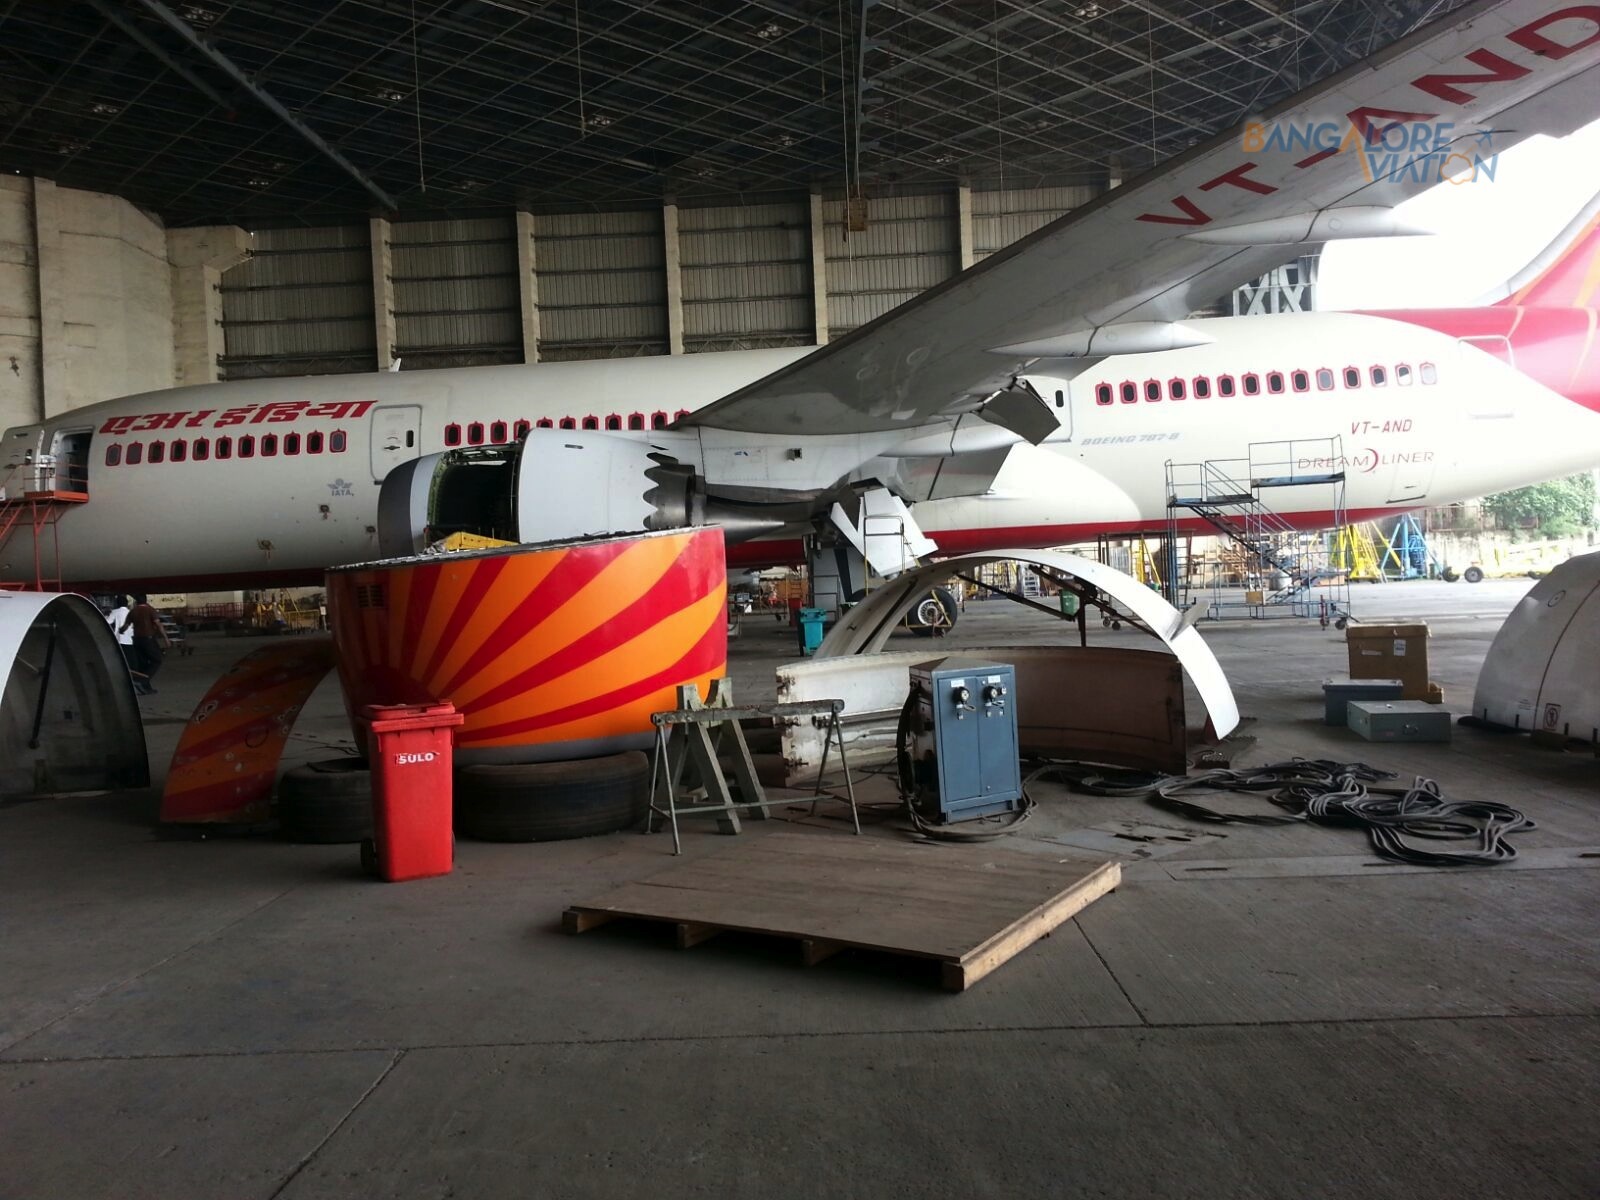 Air India Boeing 787-8 Dreamliner VT-AND grounded for nine months in a maintenance hangar at Mumbai